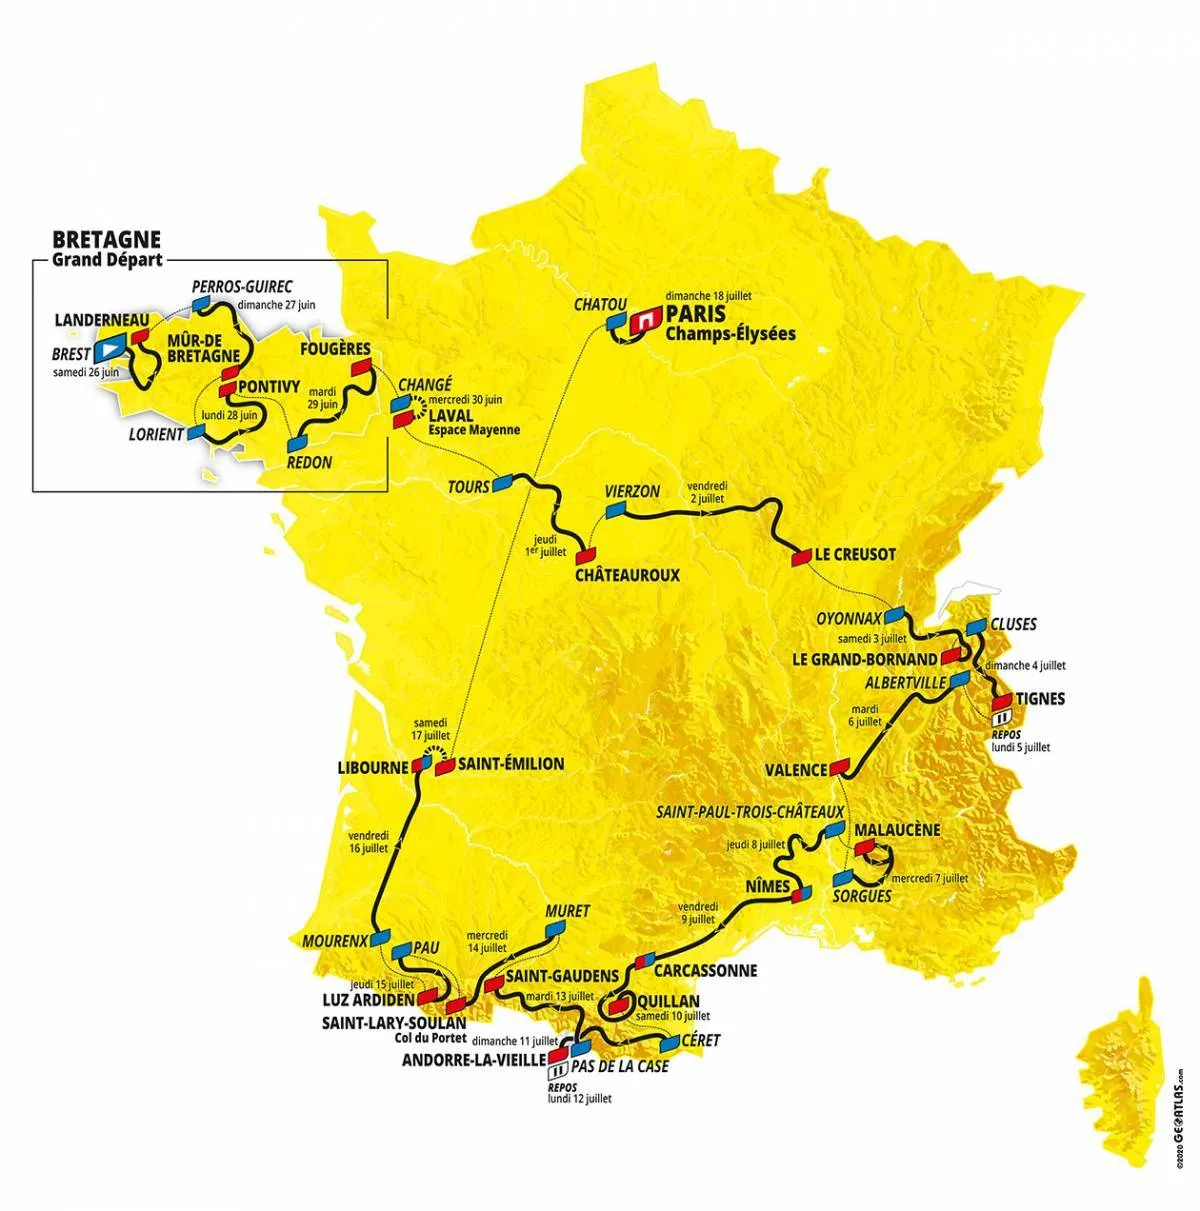 The 2021 Tour de France starts in Brittany and includes a double ascent of Mont Ventoux